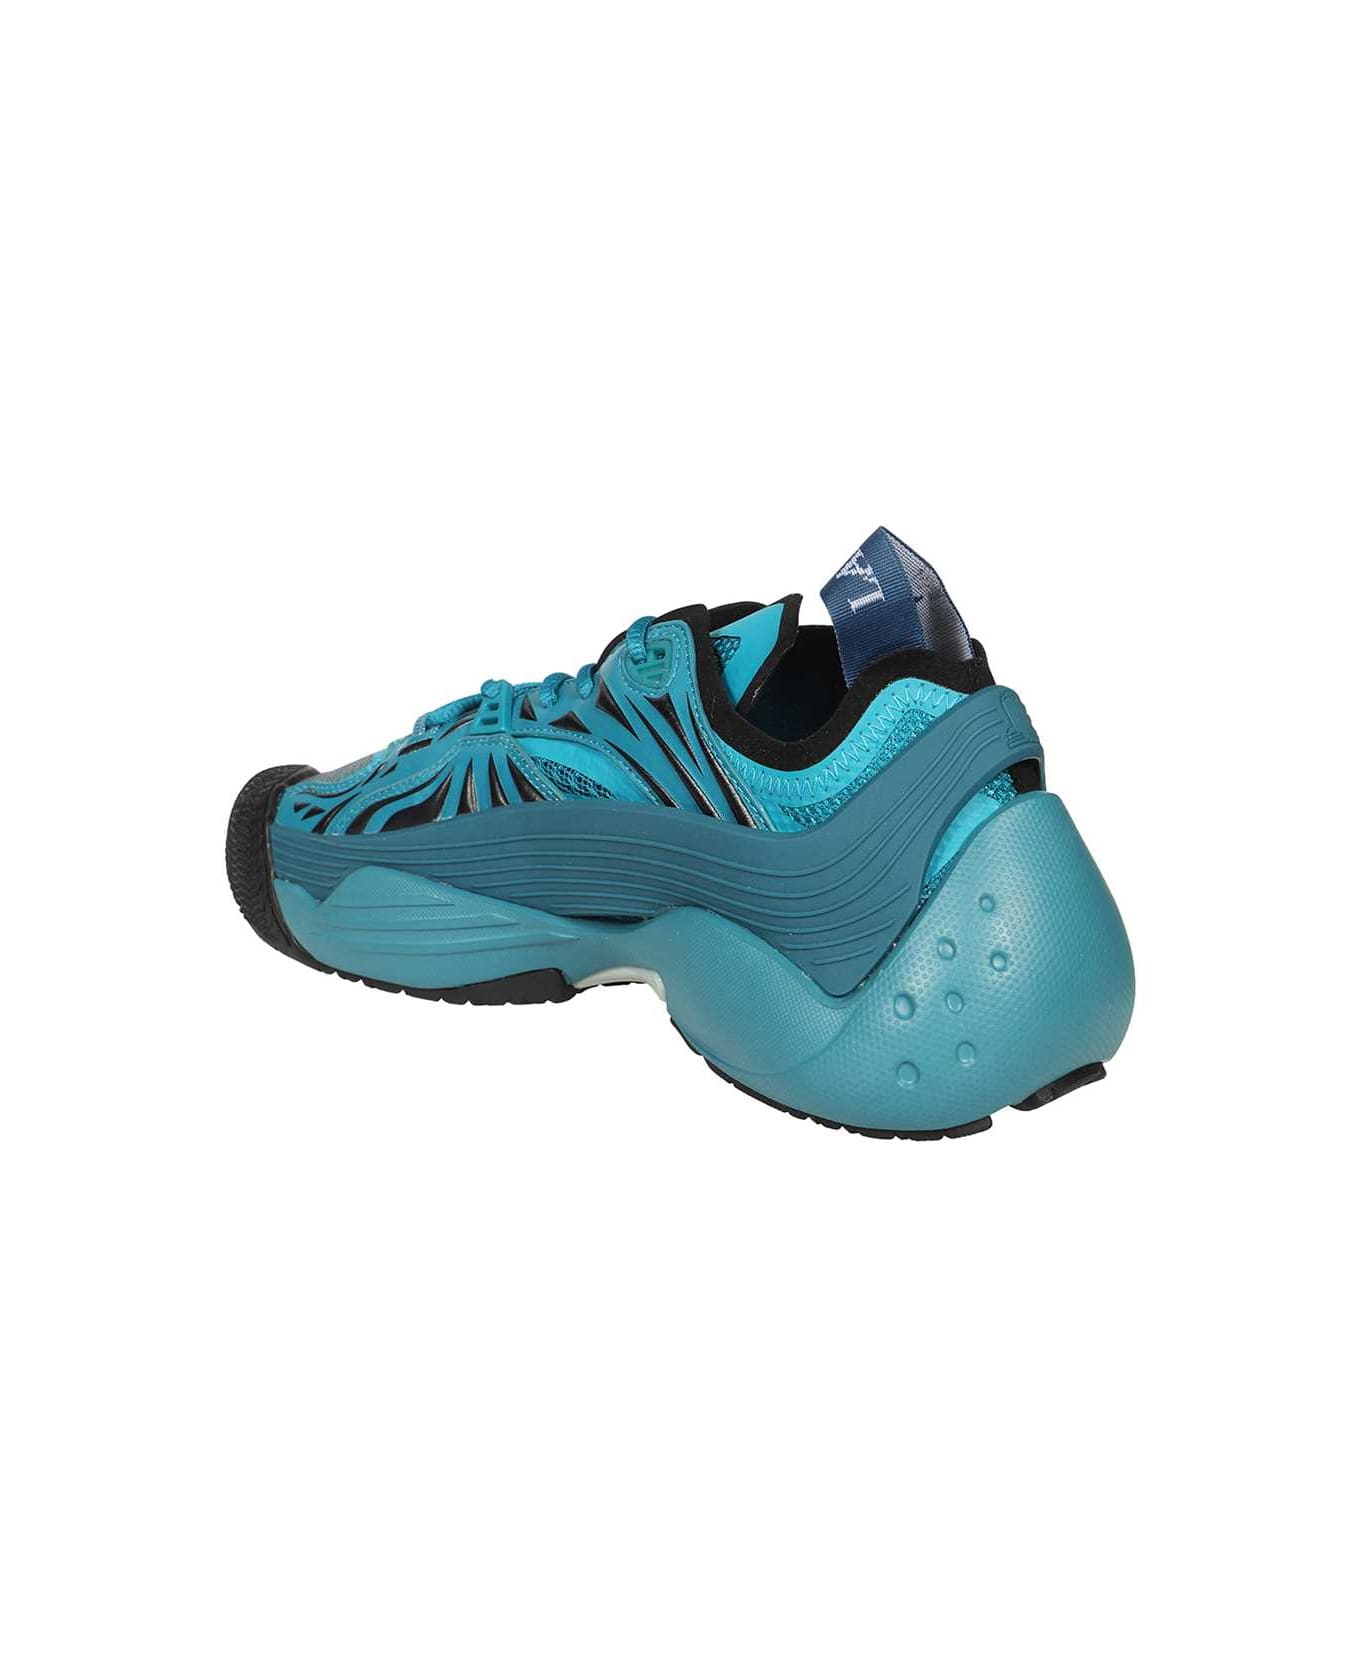 Lanvin Low-top Sneakers - turquoise スニーカー